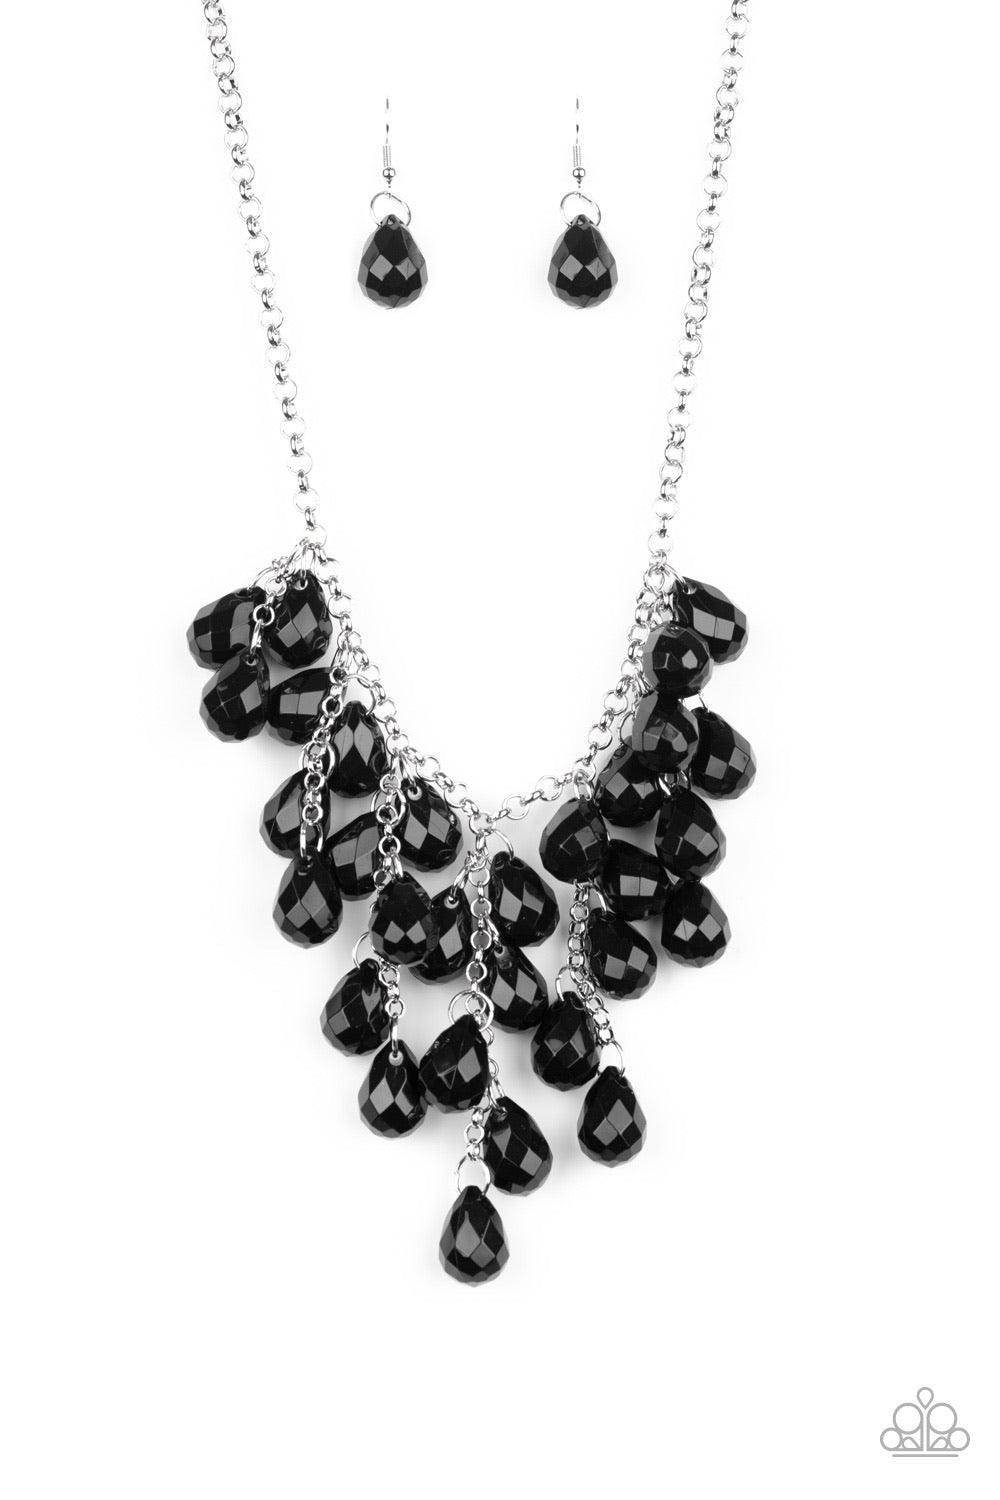 Paparazzi Accessories Serenely Scattered - Black Strands of faceted black teardrops cascade from the bottom of a shimmery silver chain, creating a scattered fringe below the collar. Features an adjustable clasp closure. Sold as one individual necklace. In